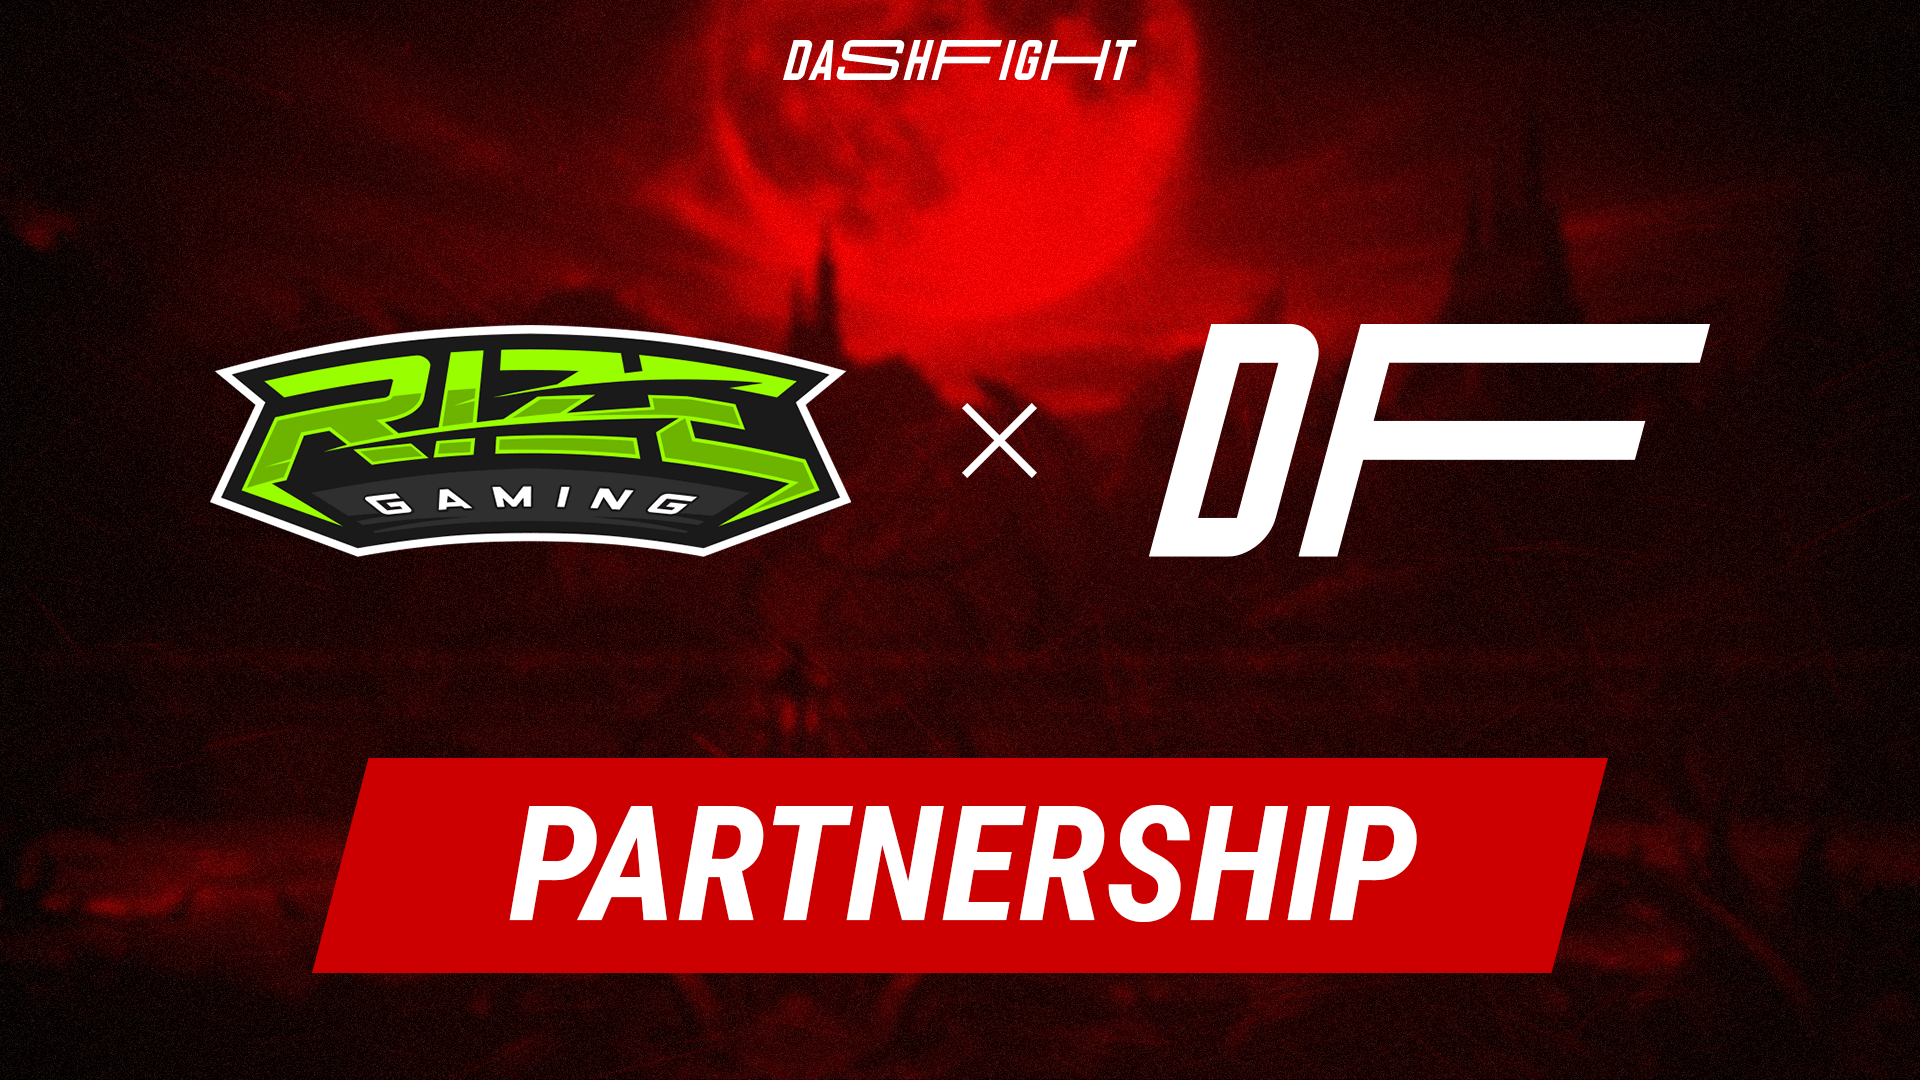 RIZE Gaming and DashFight will partner